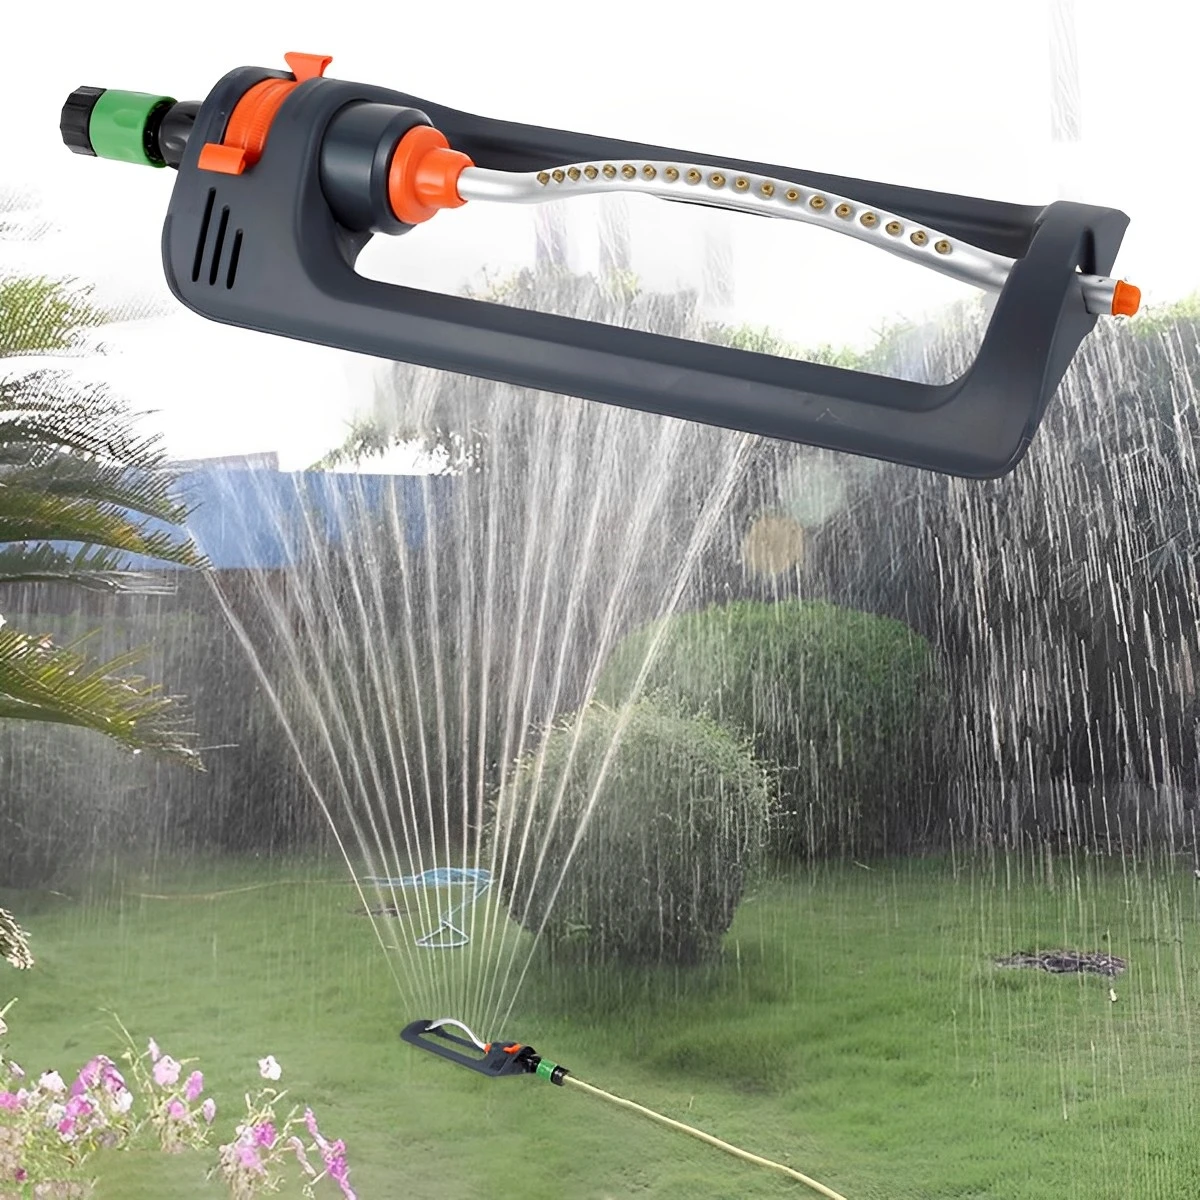 

19 Nozzles Oscillating Water Sprinklers Automatic Garden Sprinkler for Lawn Large Area Patio Sprinkler for Yard Watering Equip